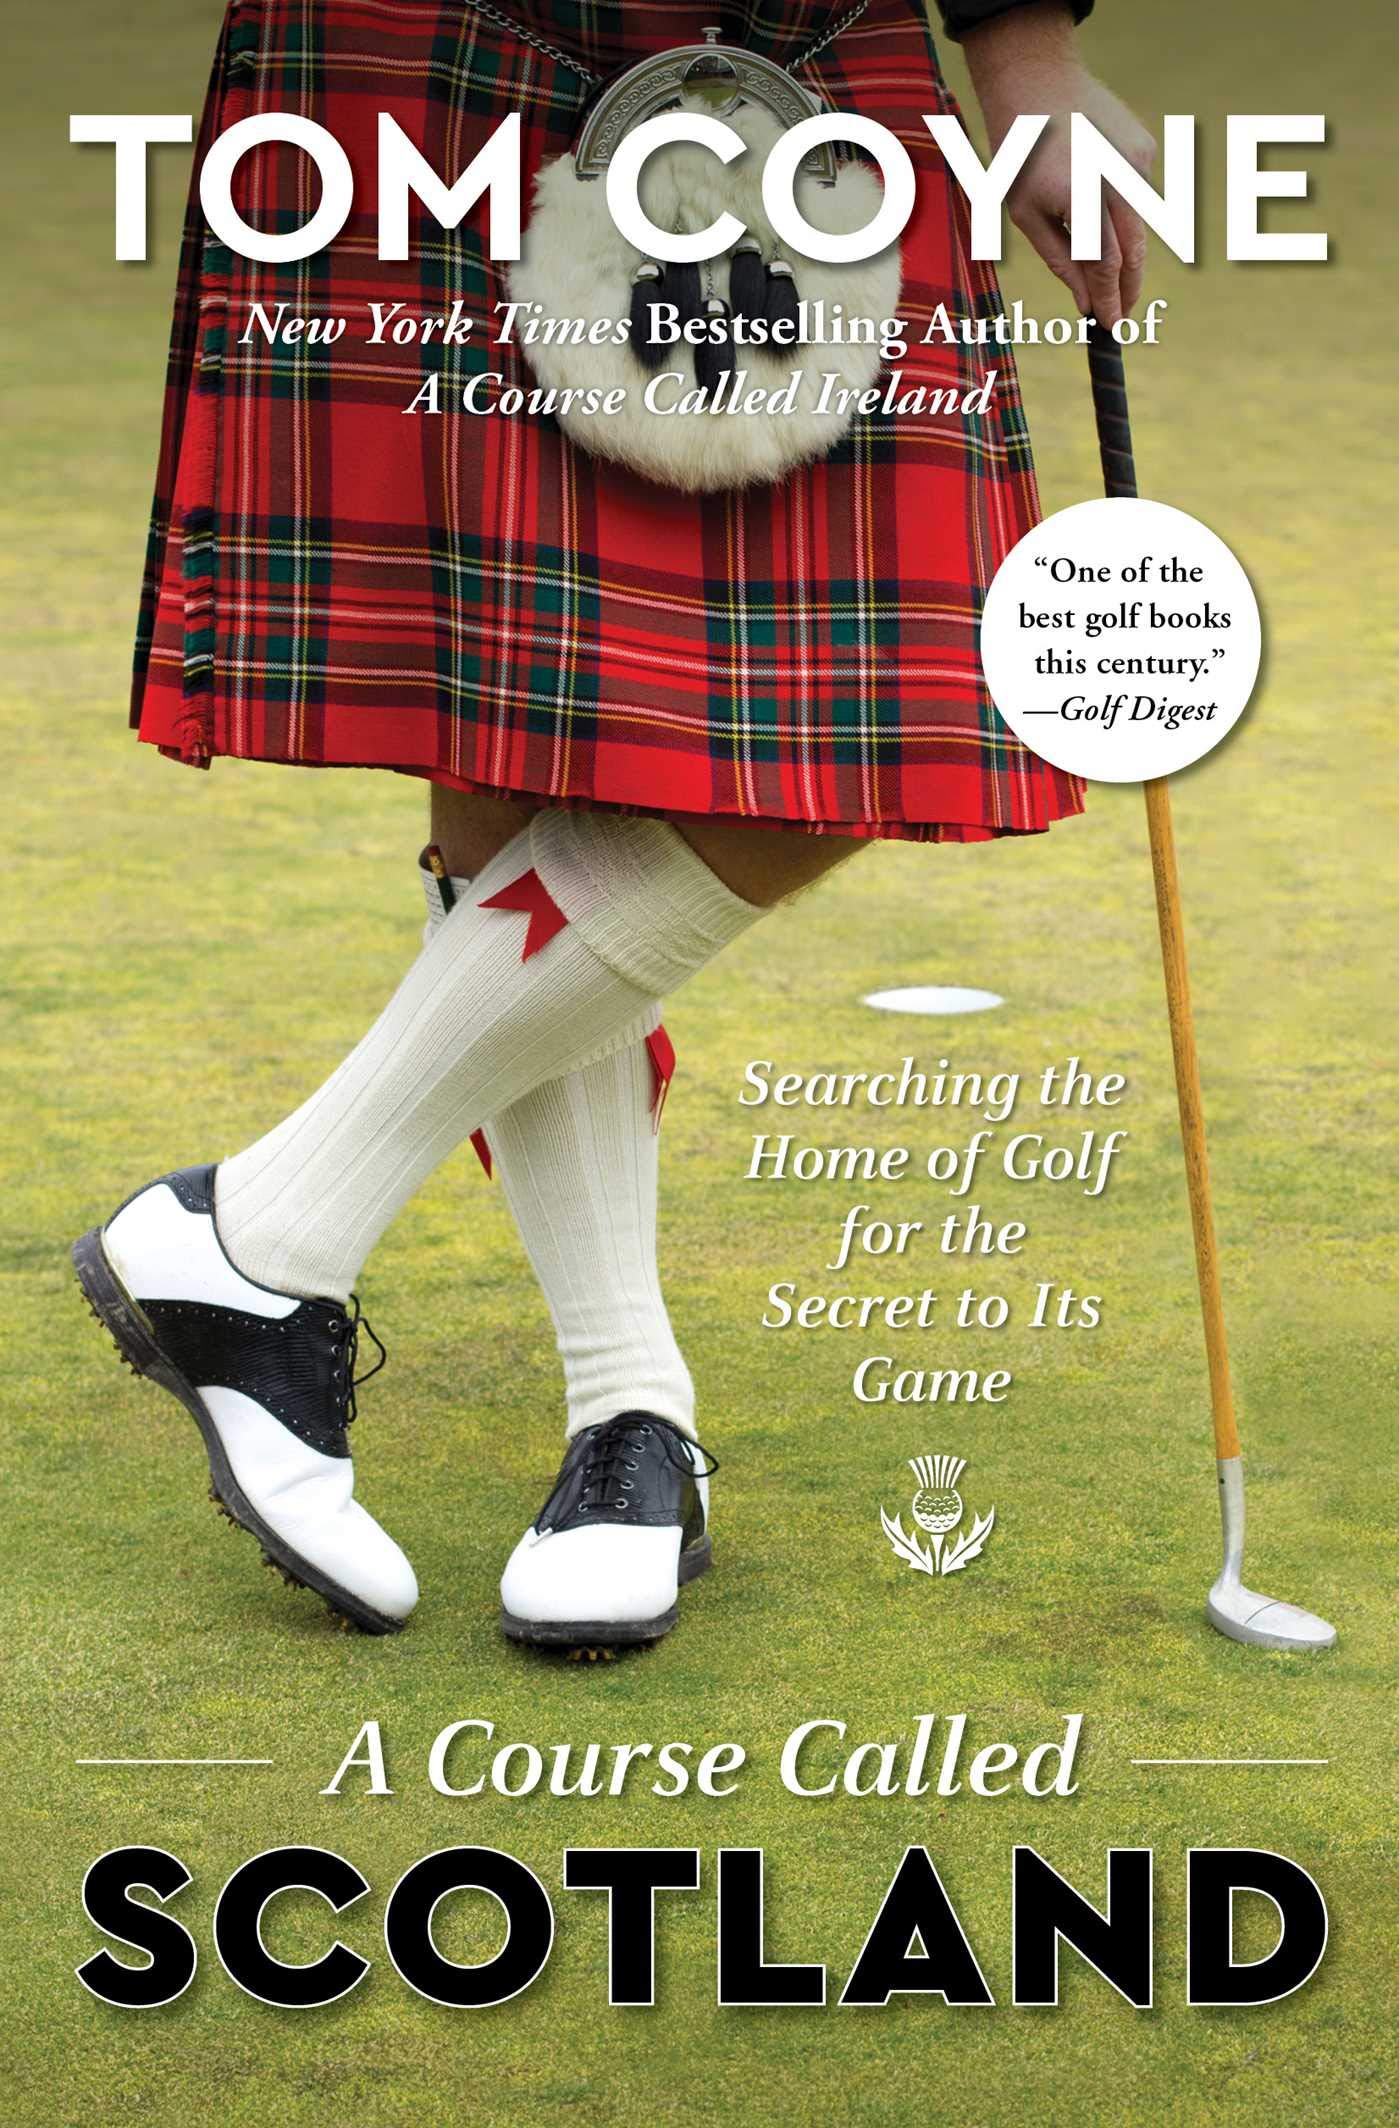 Image for "A Course Called Scotland"